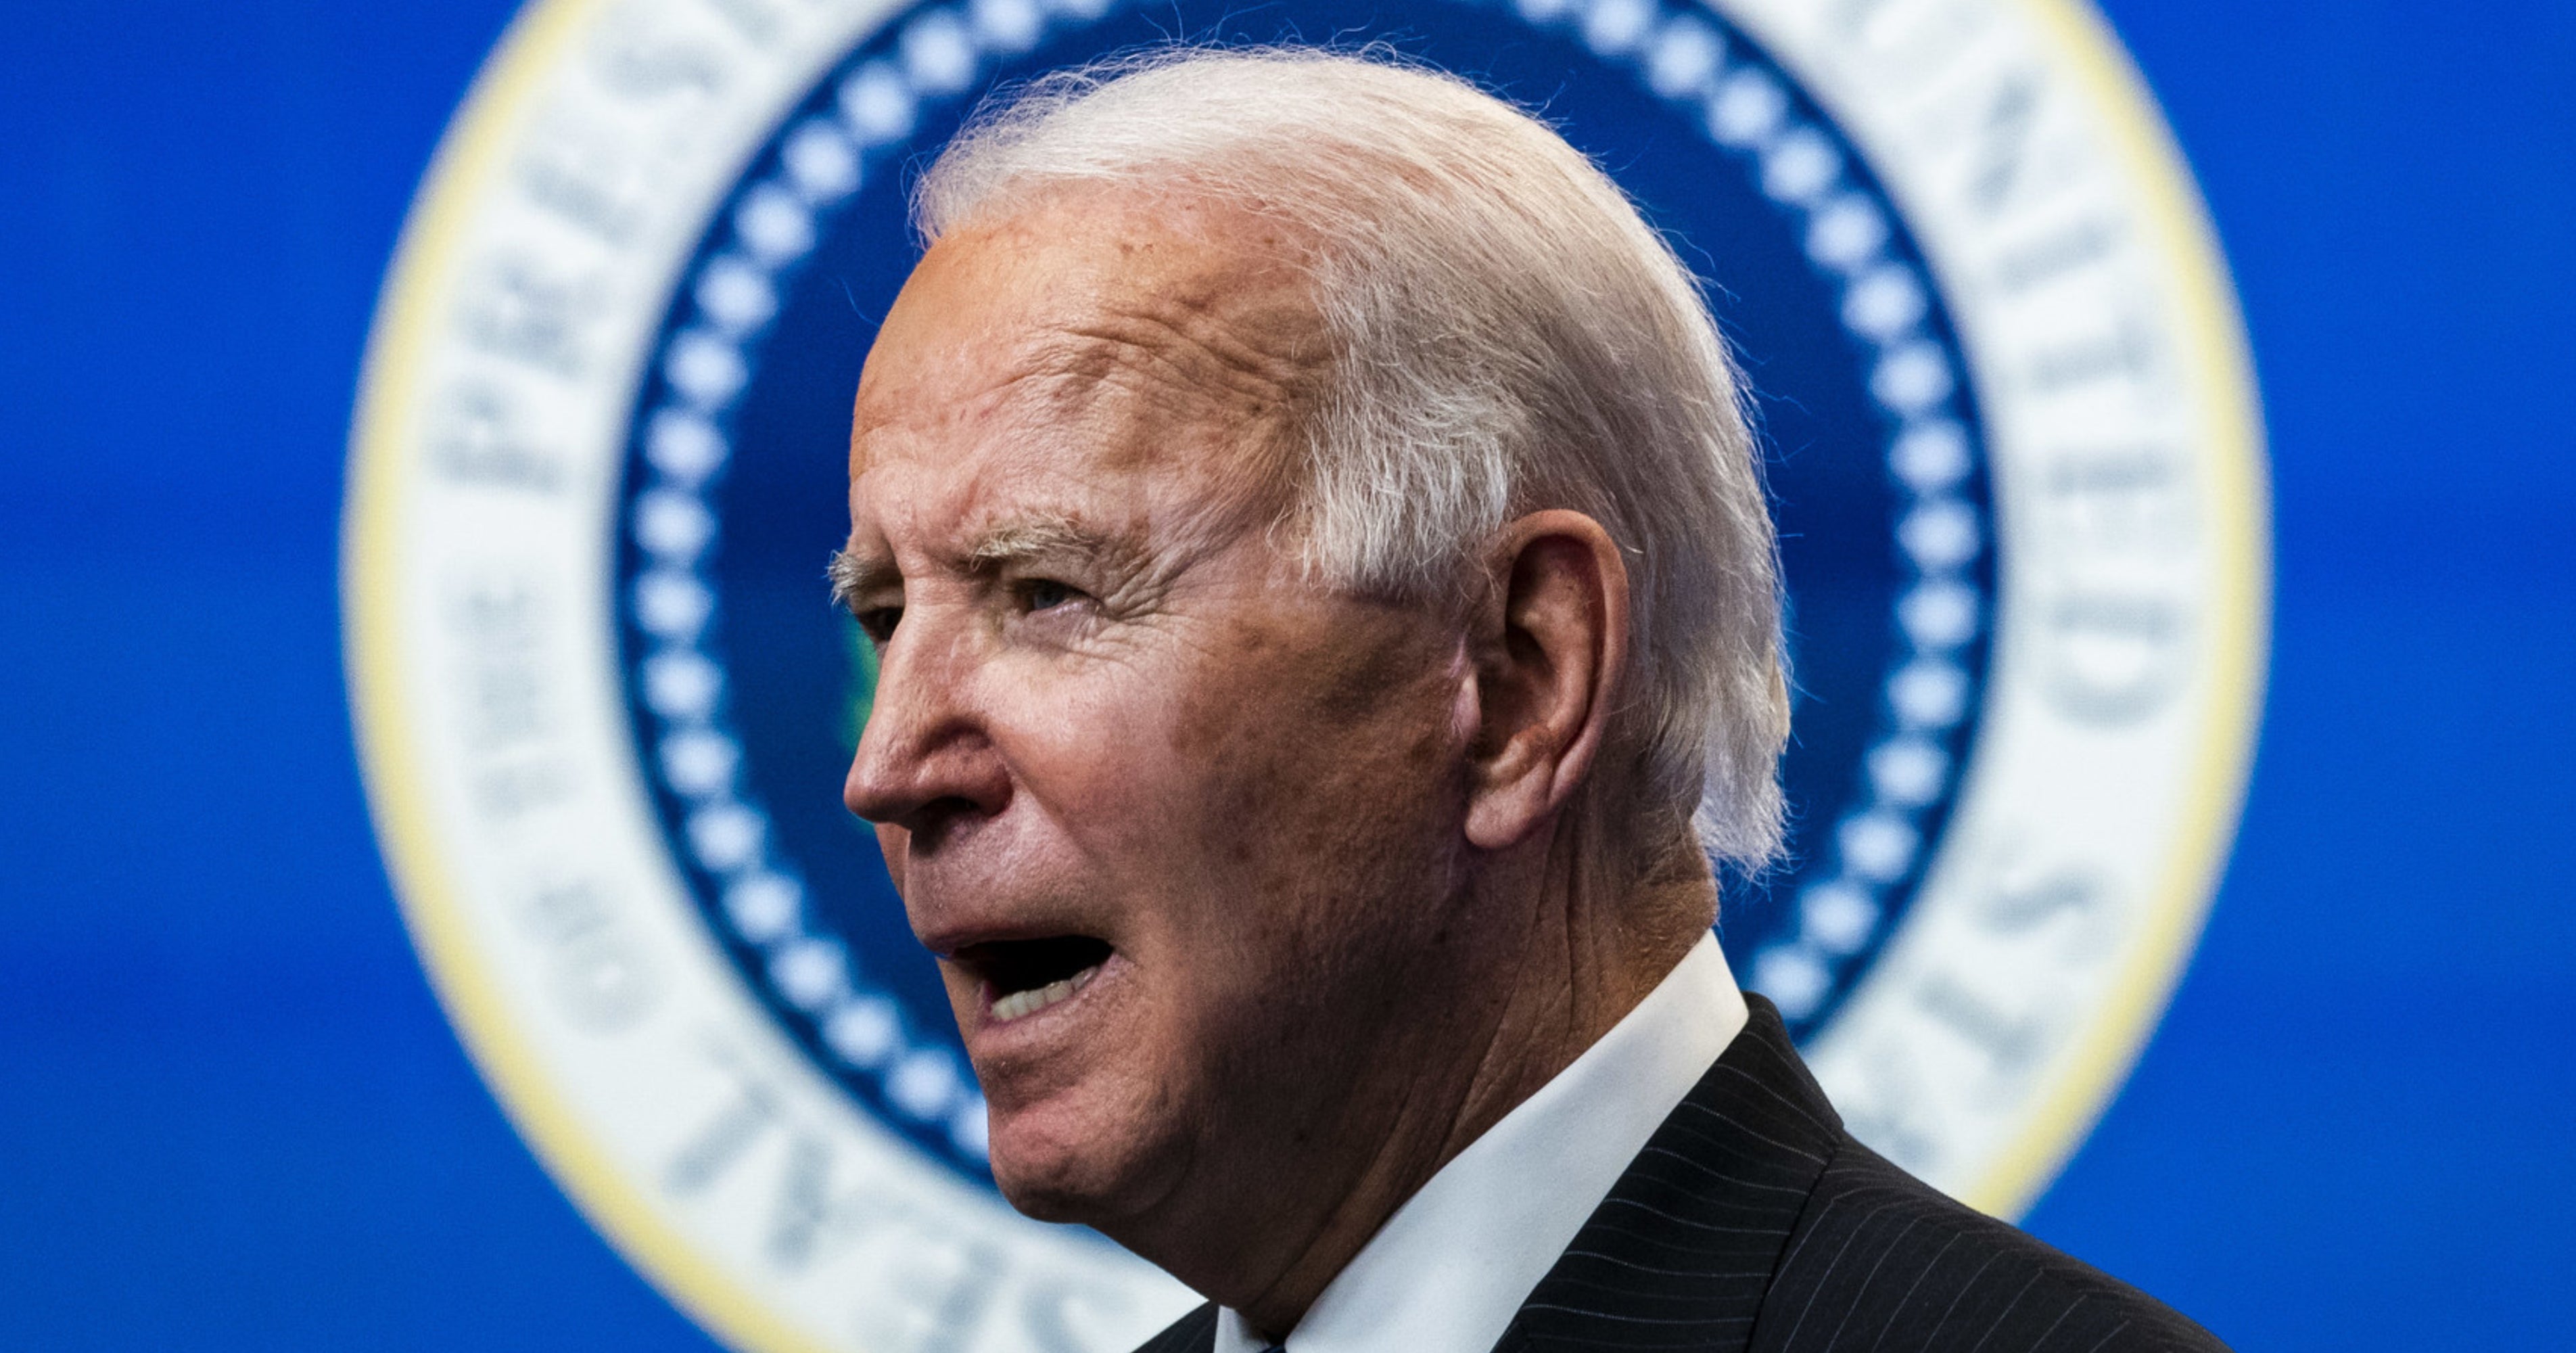 Biden Will Repeal One Of Trump's Major Anti-Abortion Policies